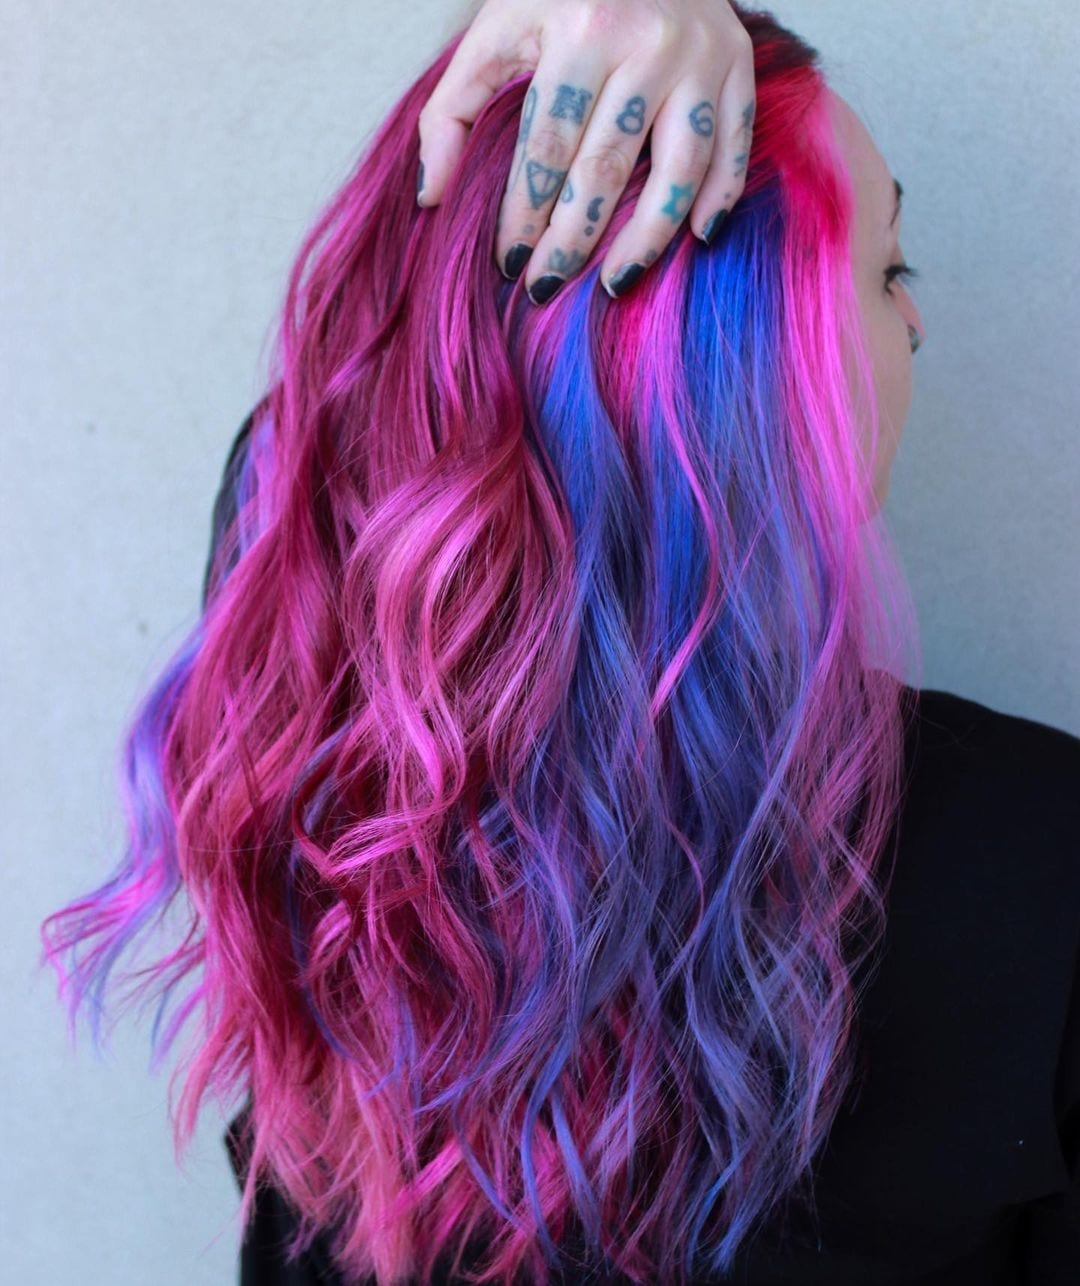 Galaxy hair featuring bright purple and pink highlights